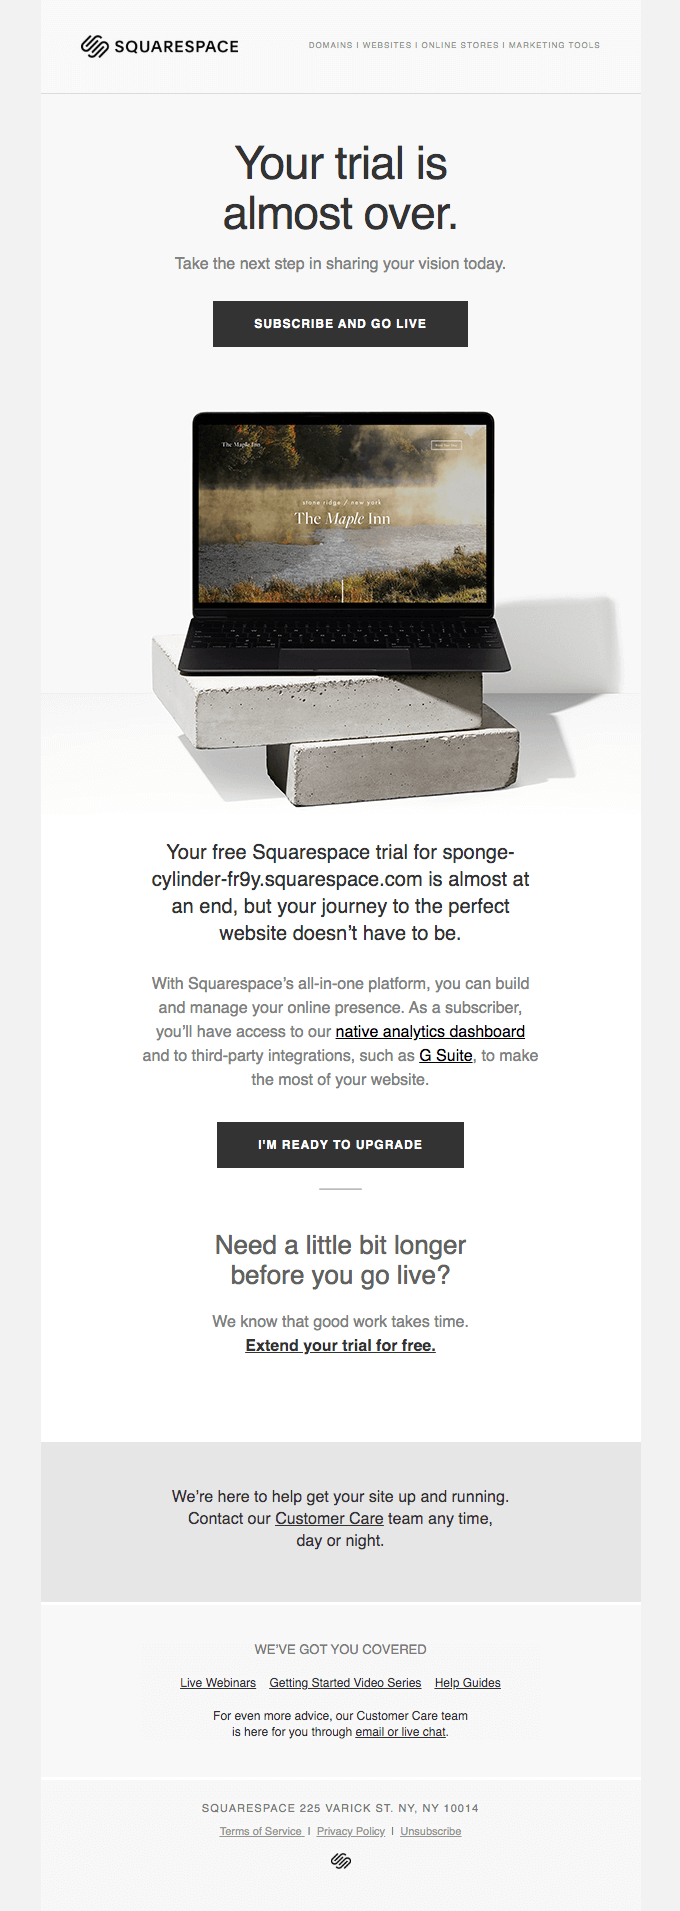 SaaS Trial Expiration Emails: Screenshot of trial expiration email from Squarespace